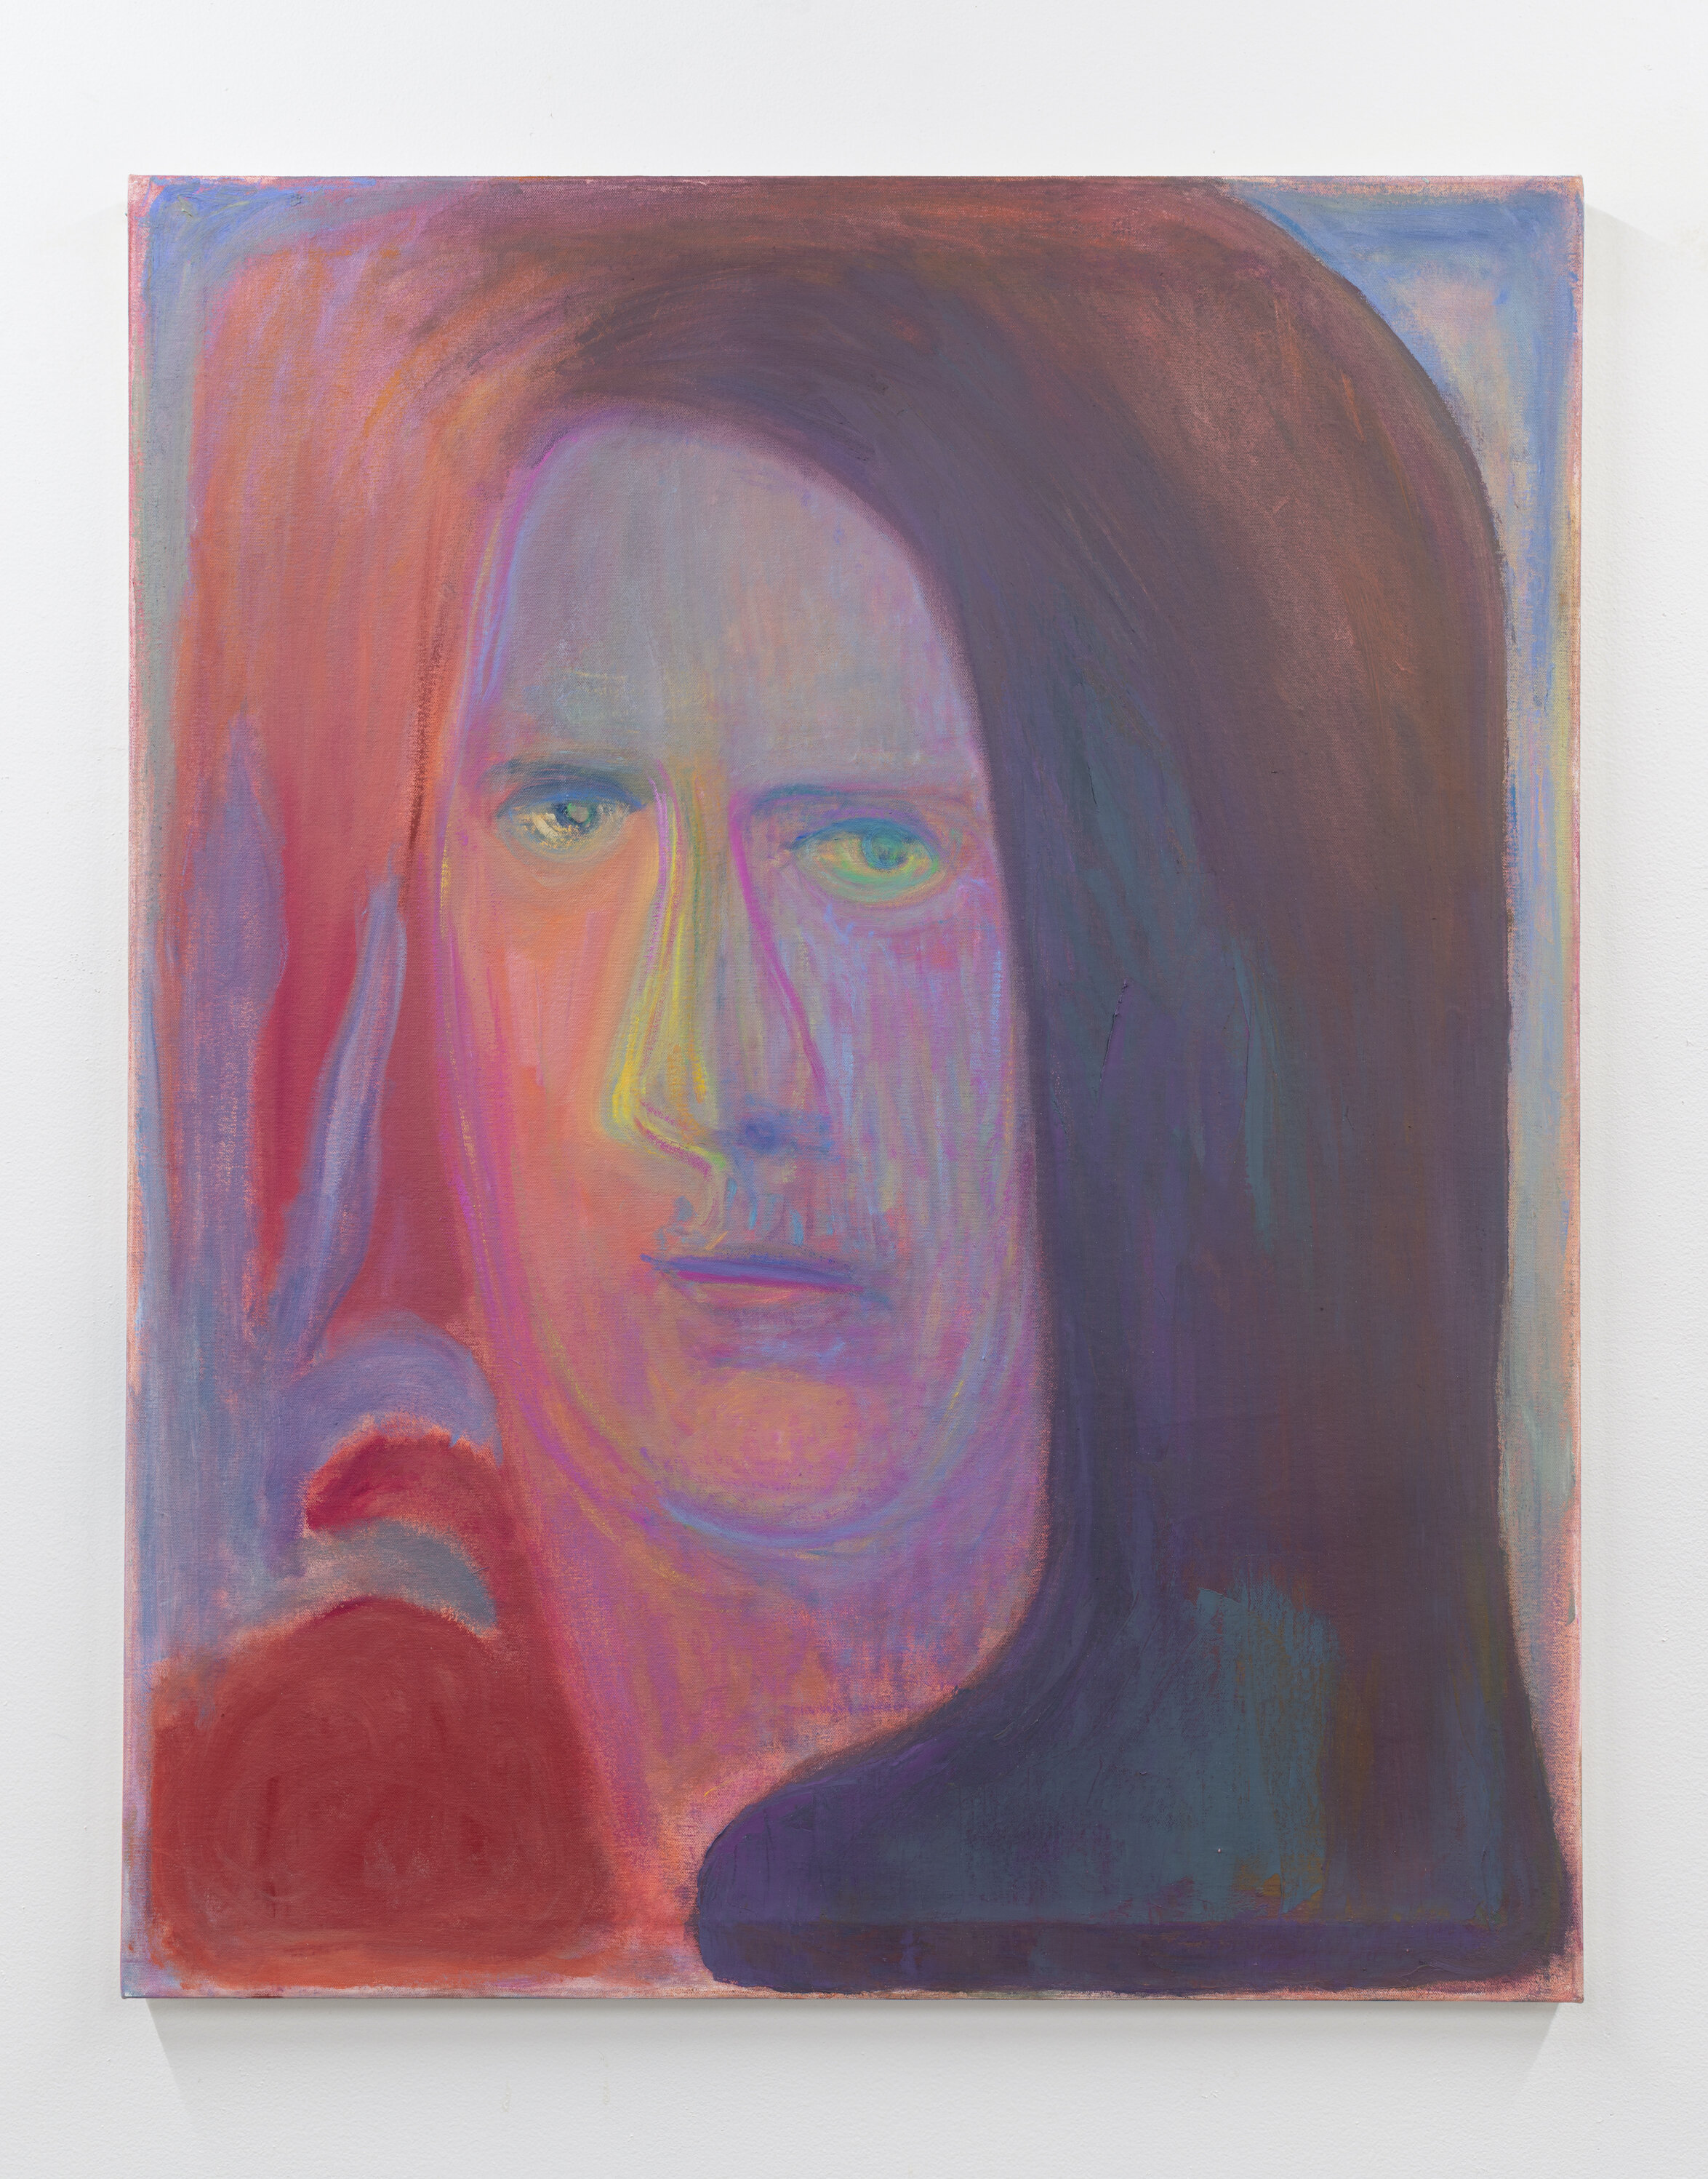  George Gittins,  Entitled , 2019  Oil on canvas  36 x 29 inches  